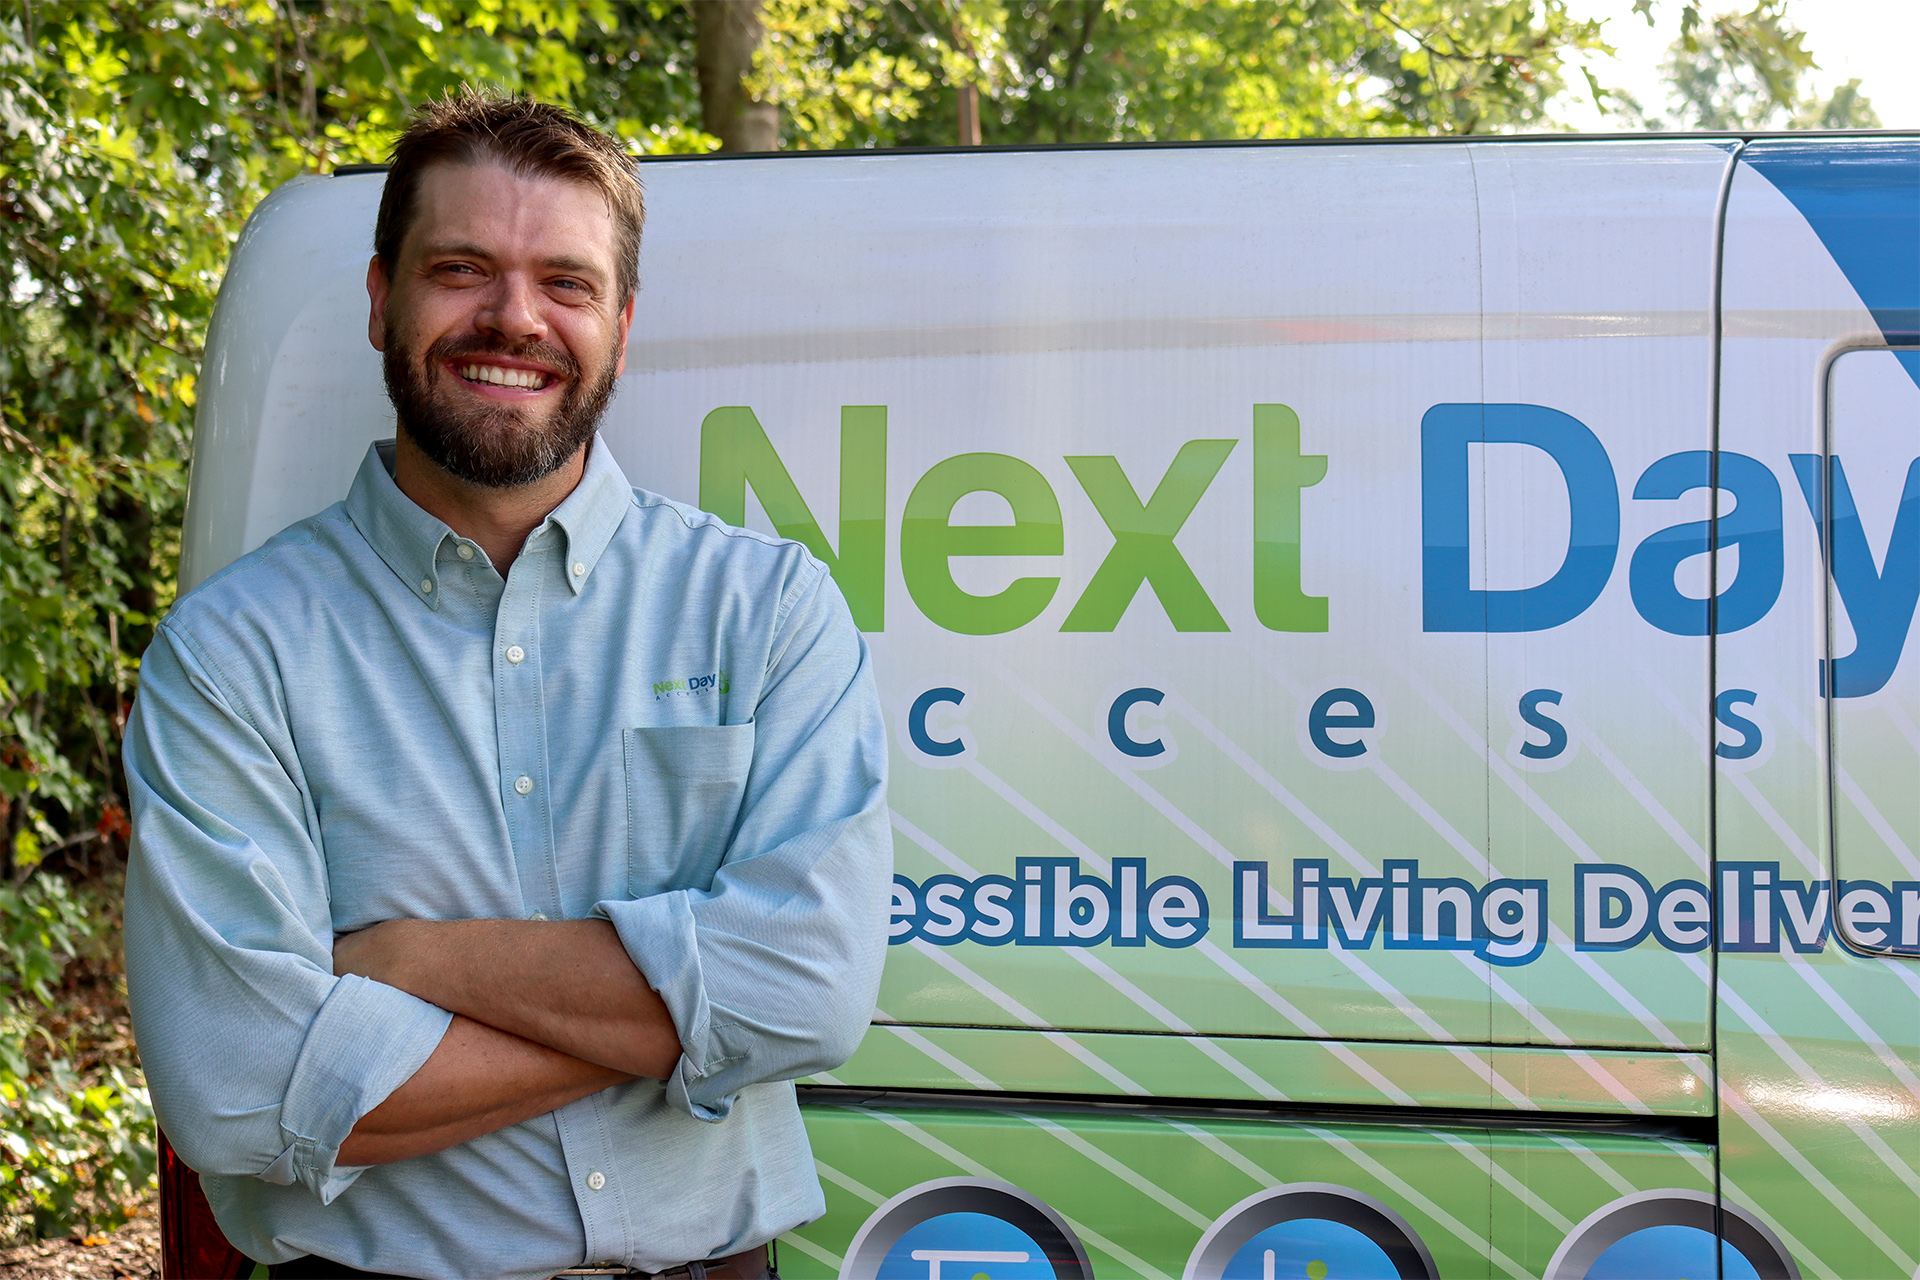 Live Independently with Next Day Access